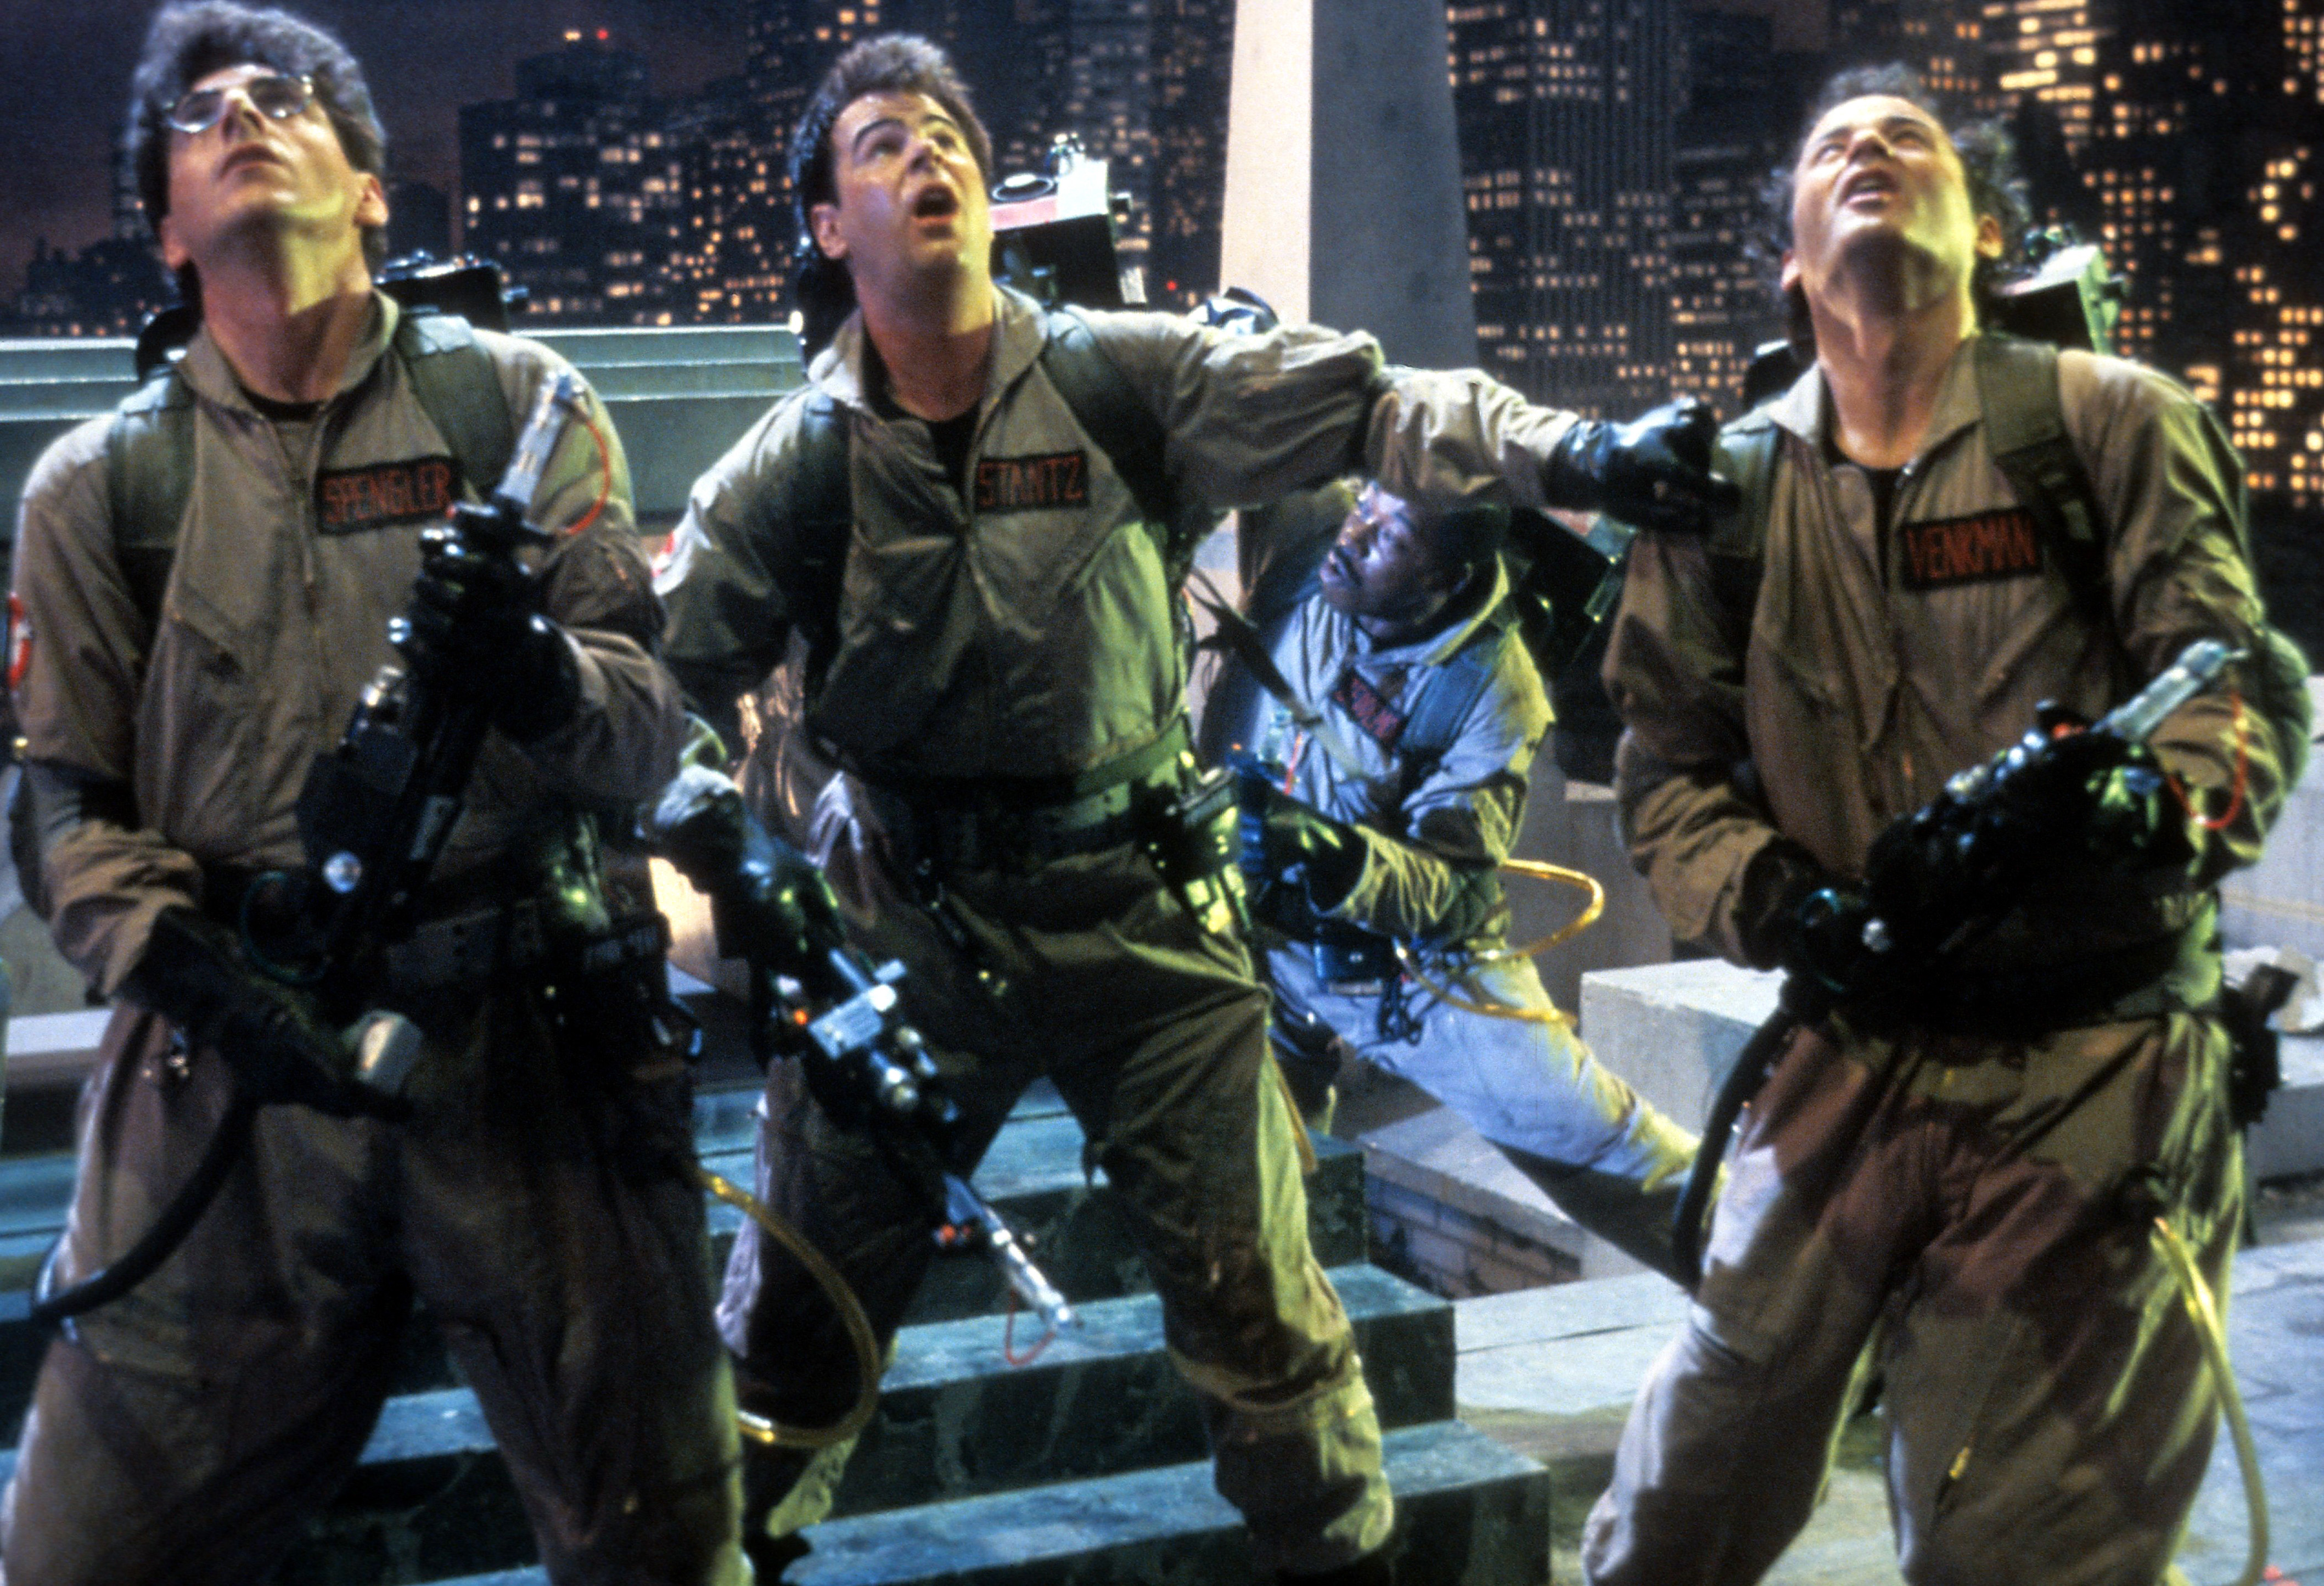 Harold Ramis, Dan Aykroyd, and Bill Murray in a scene from the film 'Ghostbusters', 1984. (Columbia Pictures/Getty Images)